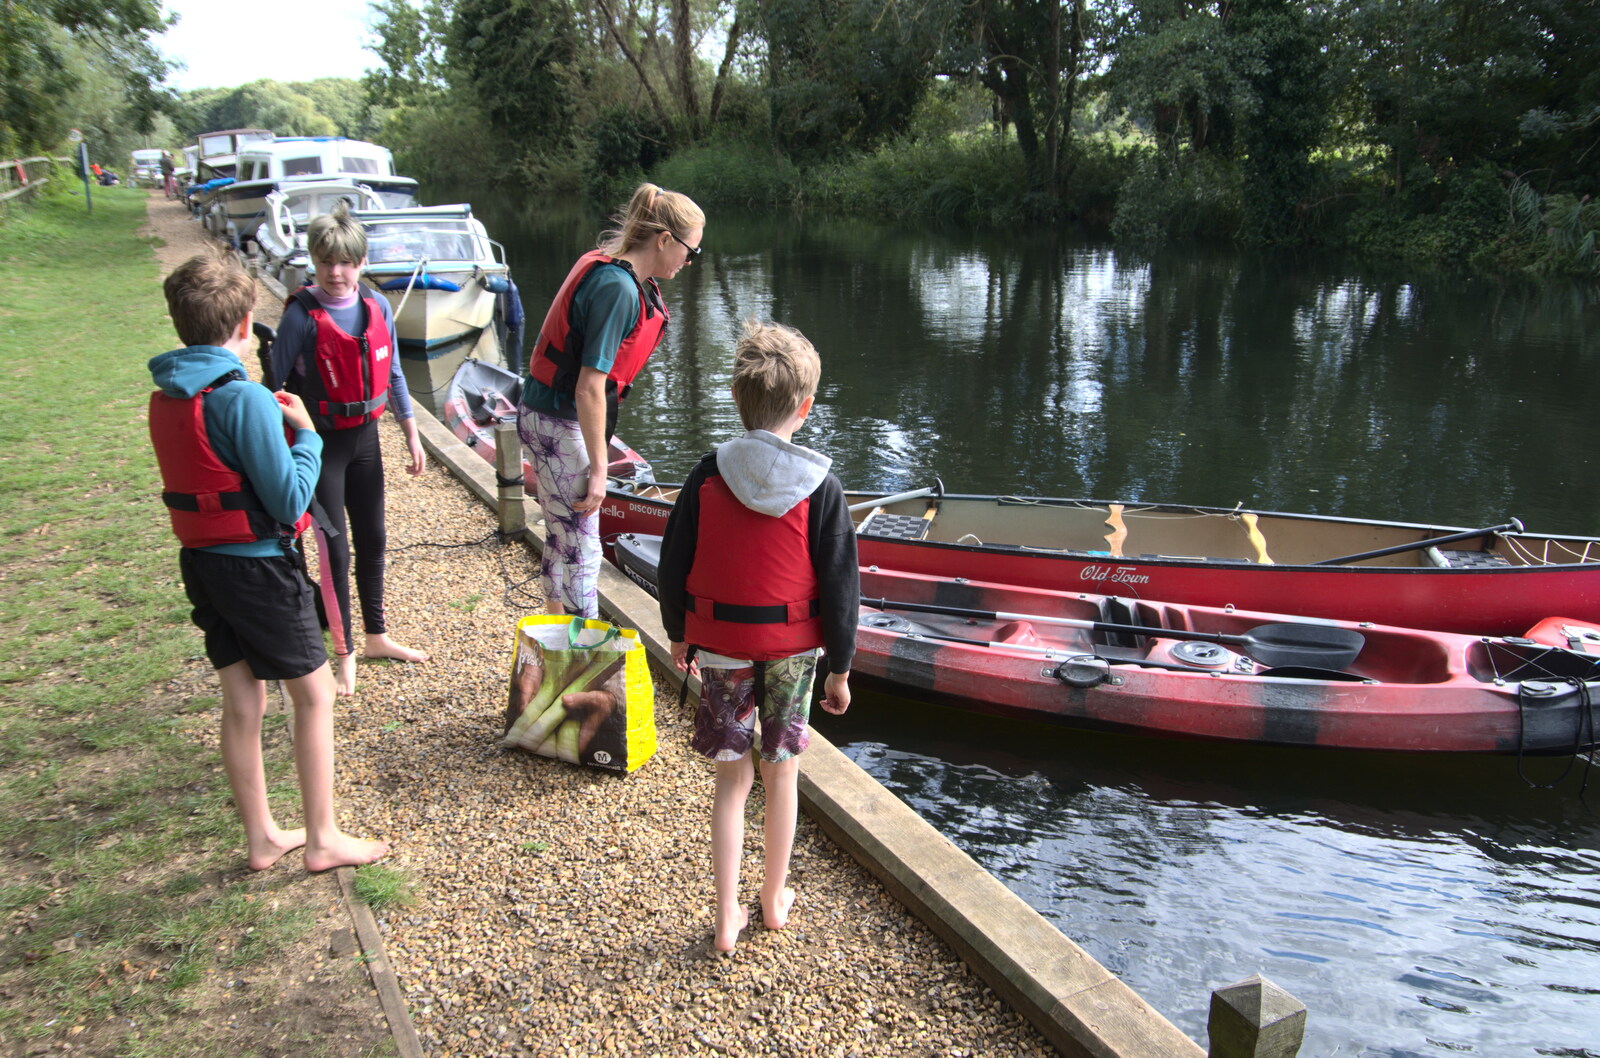 We prepare to reboard our river craft from Camping at Three Rivers, Geldeston, Norfolk - 5th September 2020